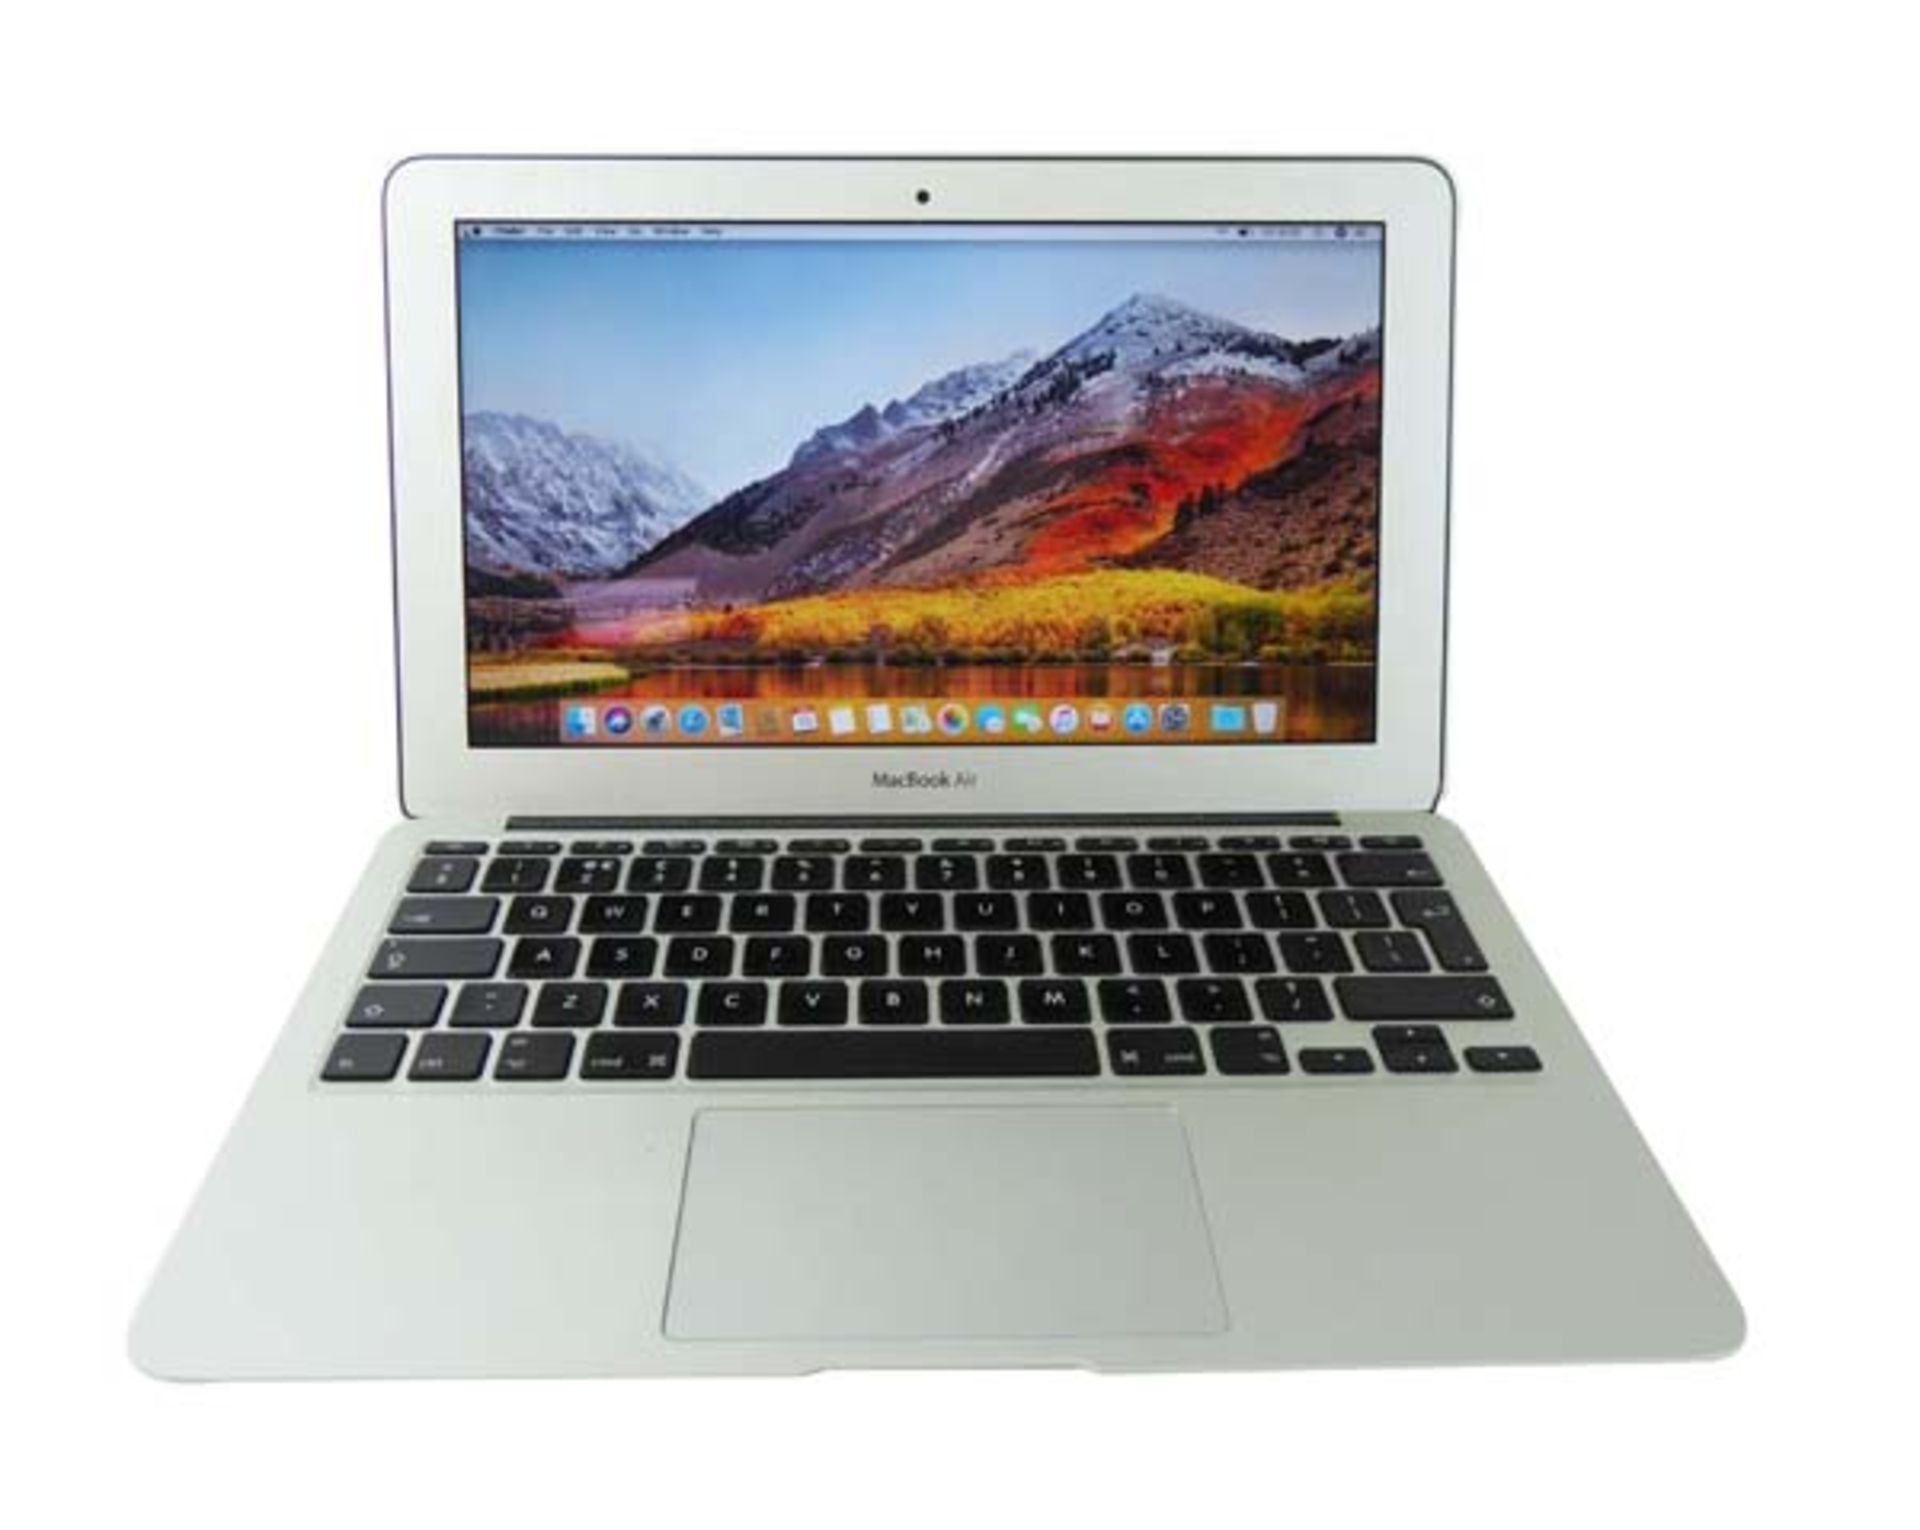 MacBook Air 11'' with 1.6GHz Core i5, 4GB RAM, 256GB SSD laptop (A1370 2011)